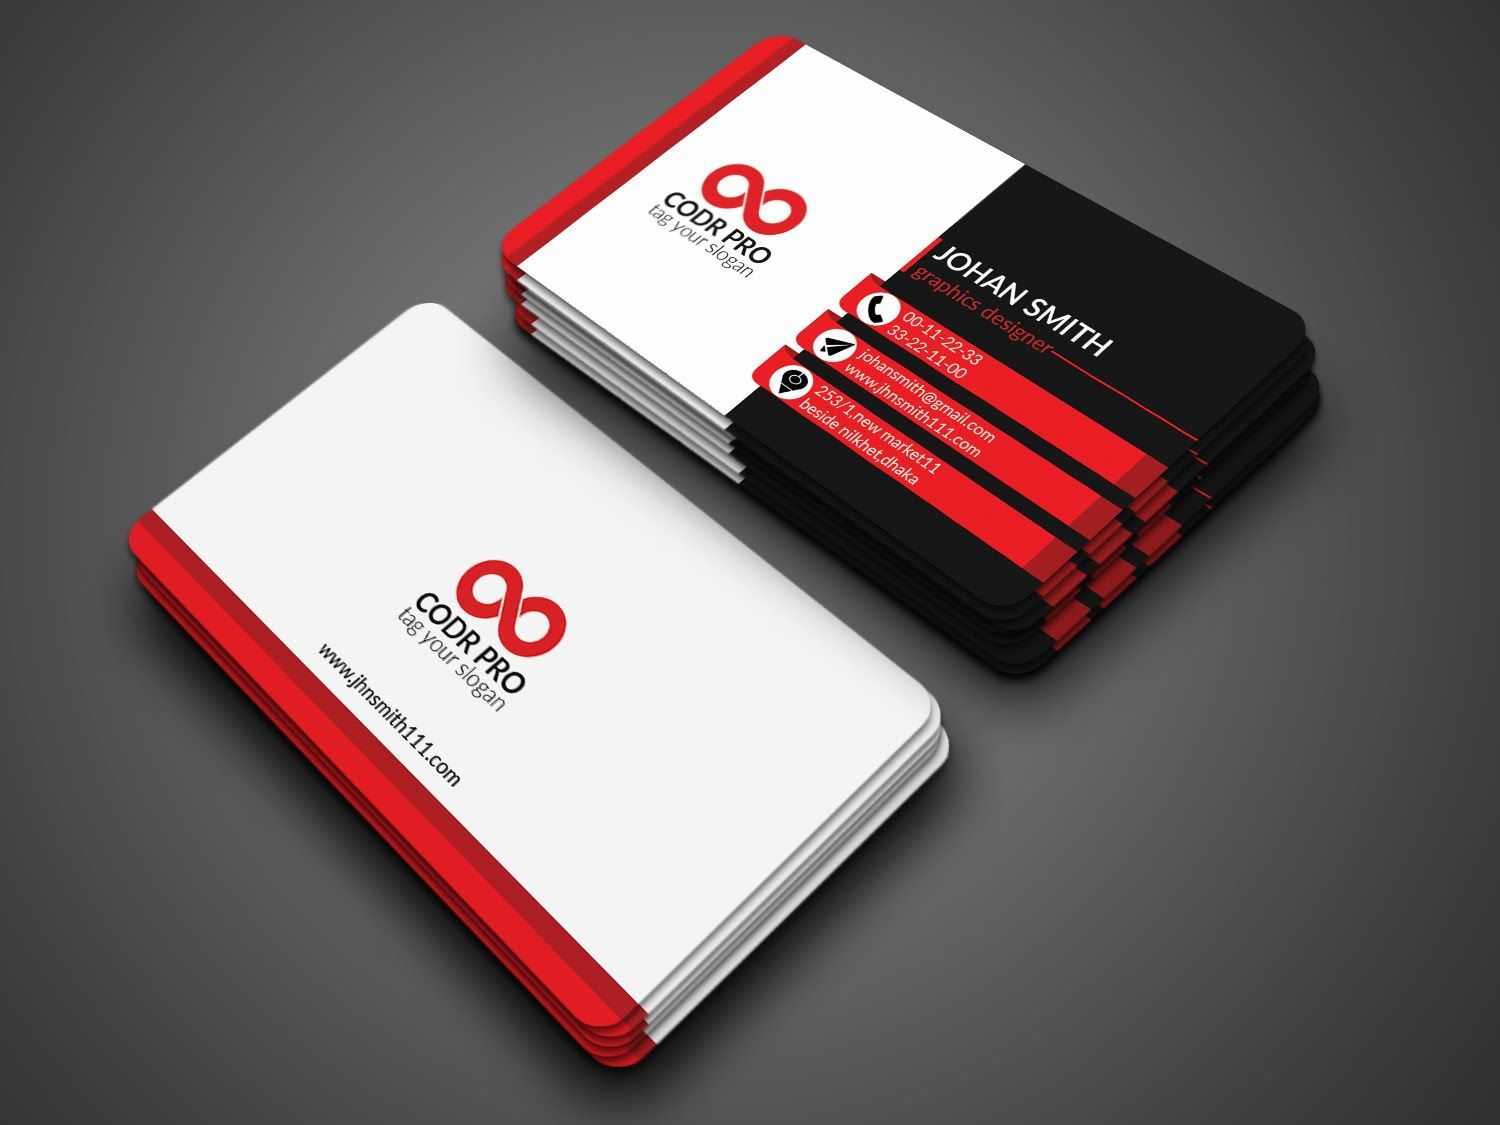 Professional Business Card Design In Photoshop Cs6 Tutorial Intended For Photoshop Cs6 Business Card Template